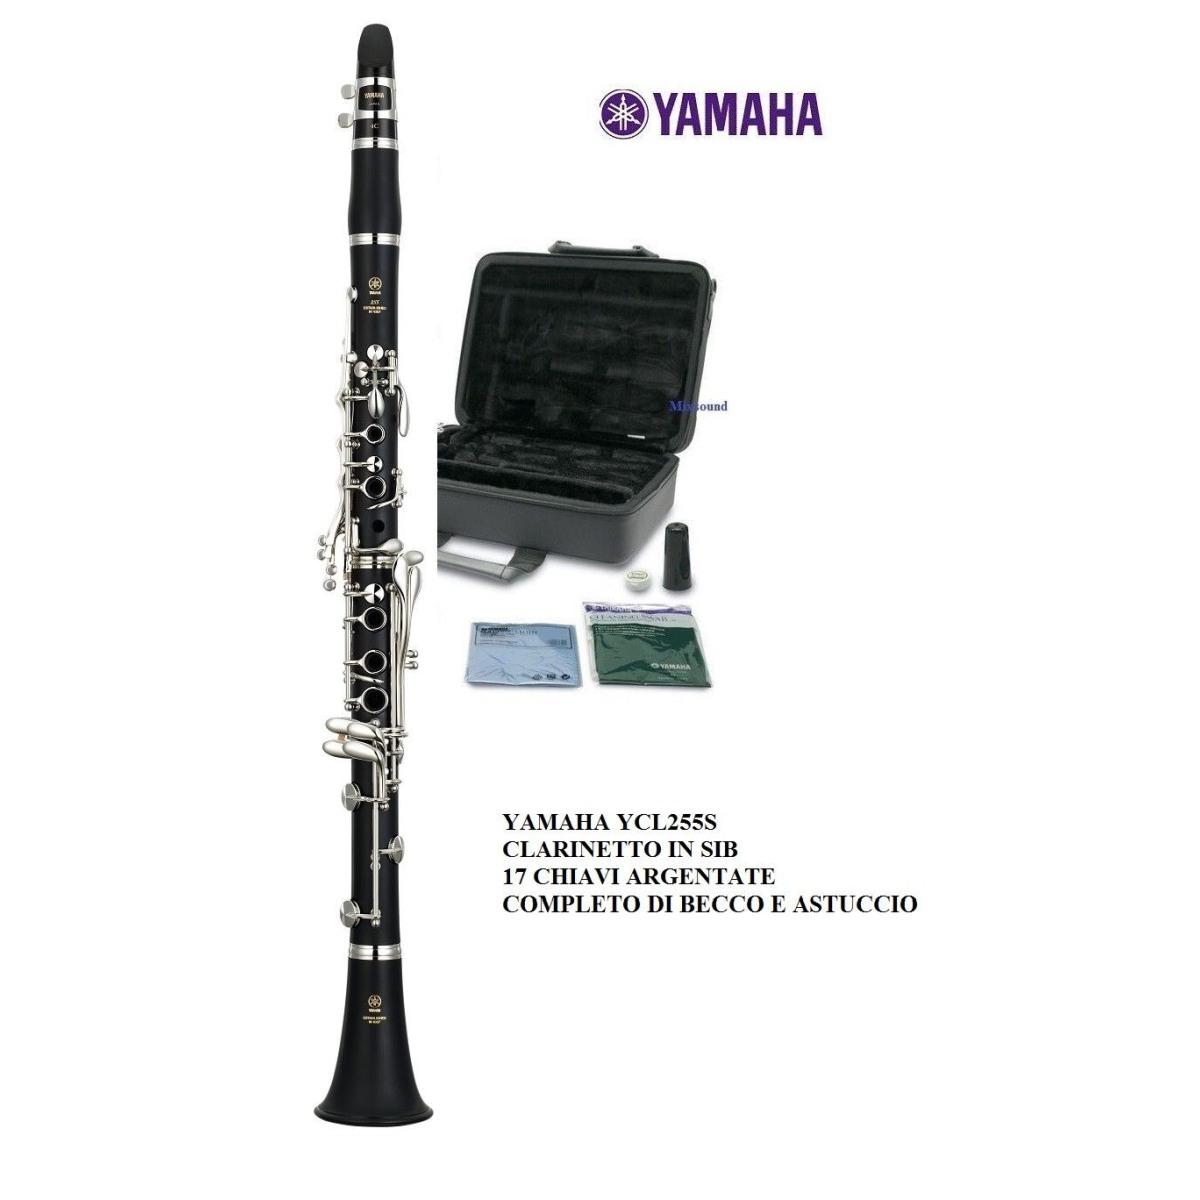 Yamaha YCL 255 S clarinetto in sib 17 chiavi argentate